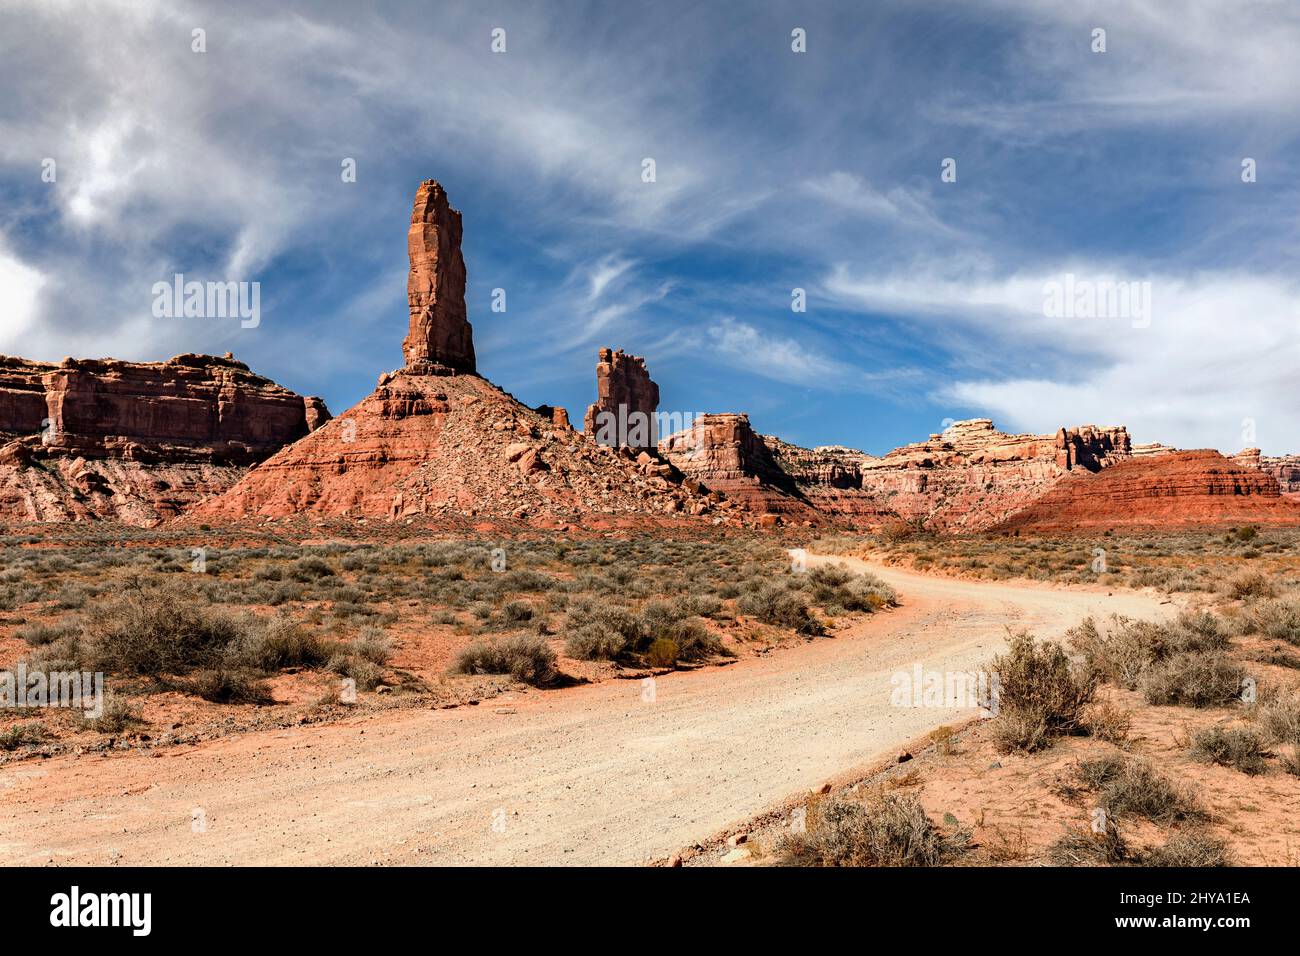 UT00922-00.....UTAH - Road winding through sandstone buttes in the Valley Of The Gods, Bears Ears National Monument. Stock Photo